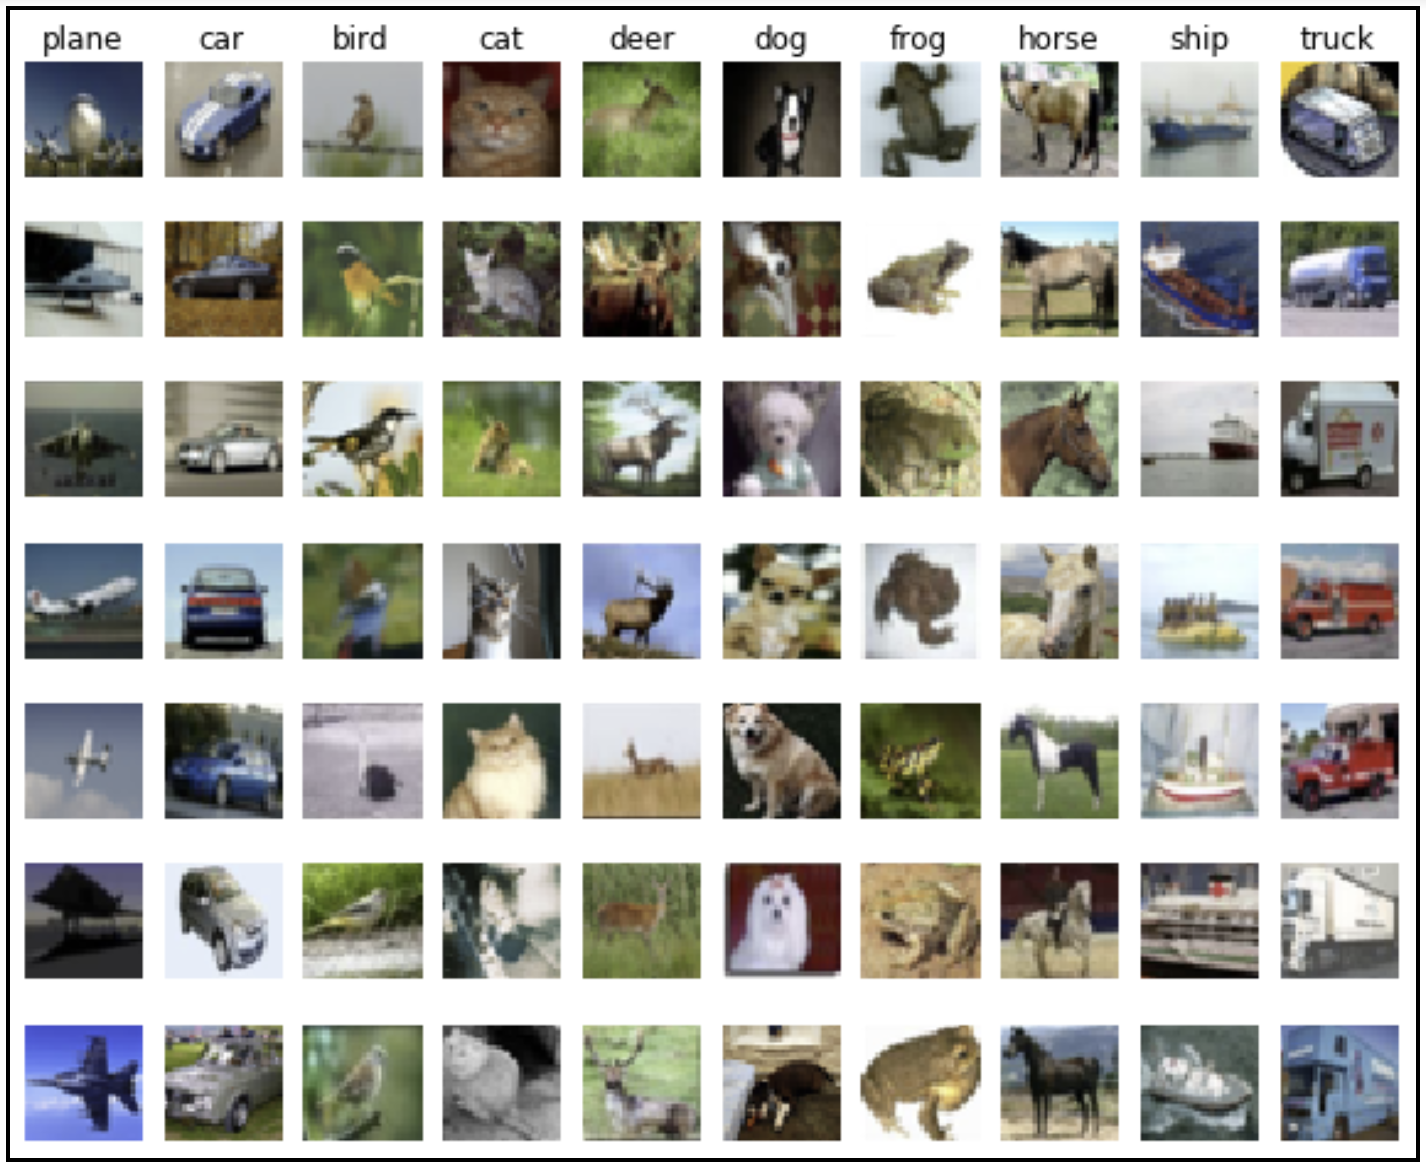 A whole bunch of captcha pictures in the categories of plane, car, bird, cat, deer, dog, frog, horse, ship and truck.